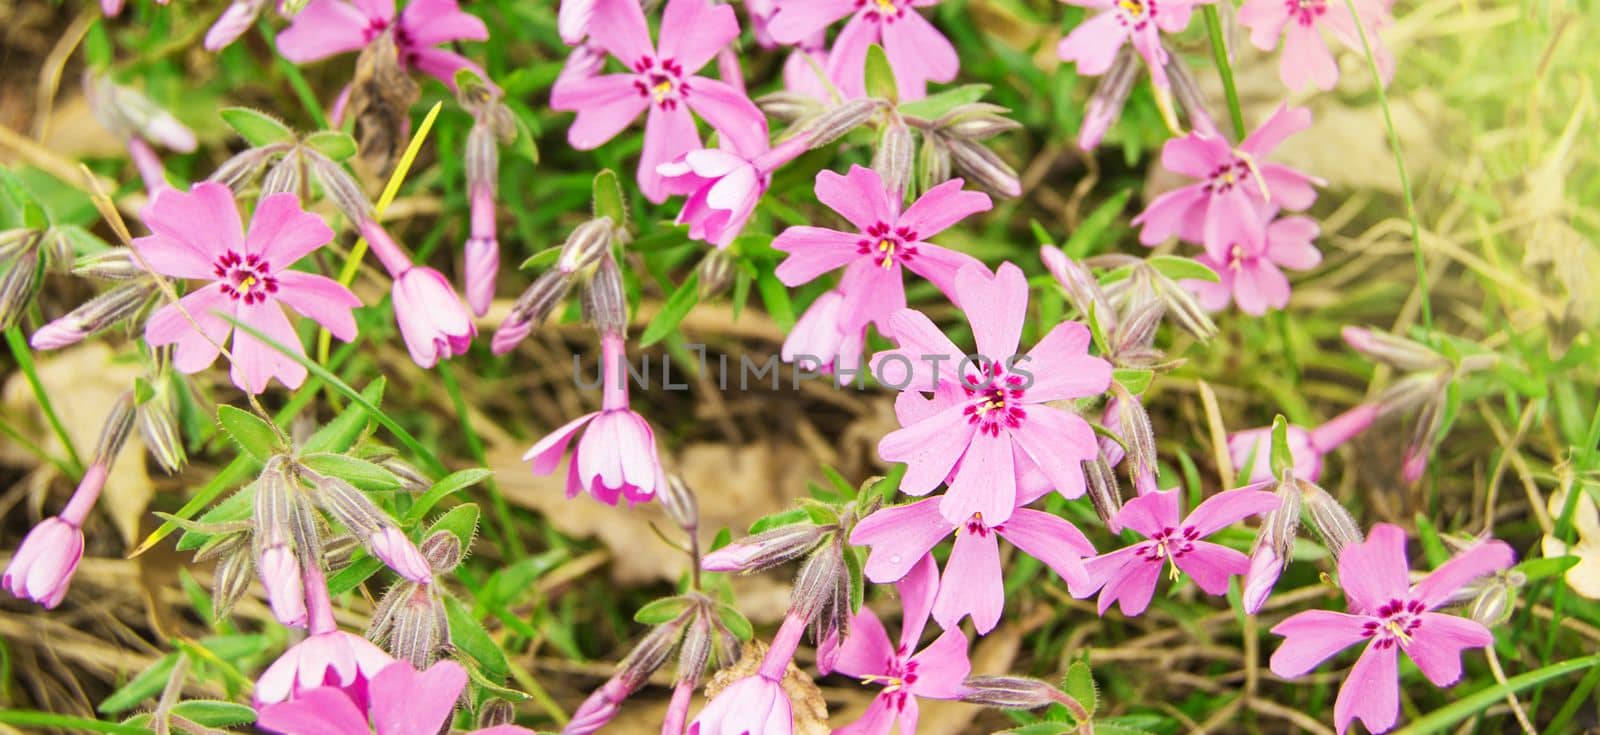 Phlox subulata, Phlox pink Flowers in the garden in summer in sunlight, floral background.